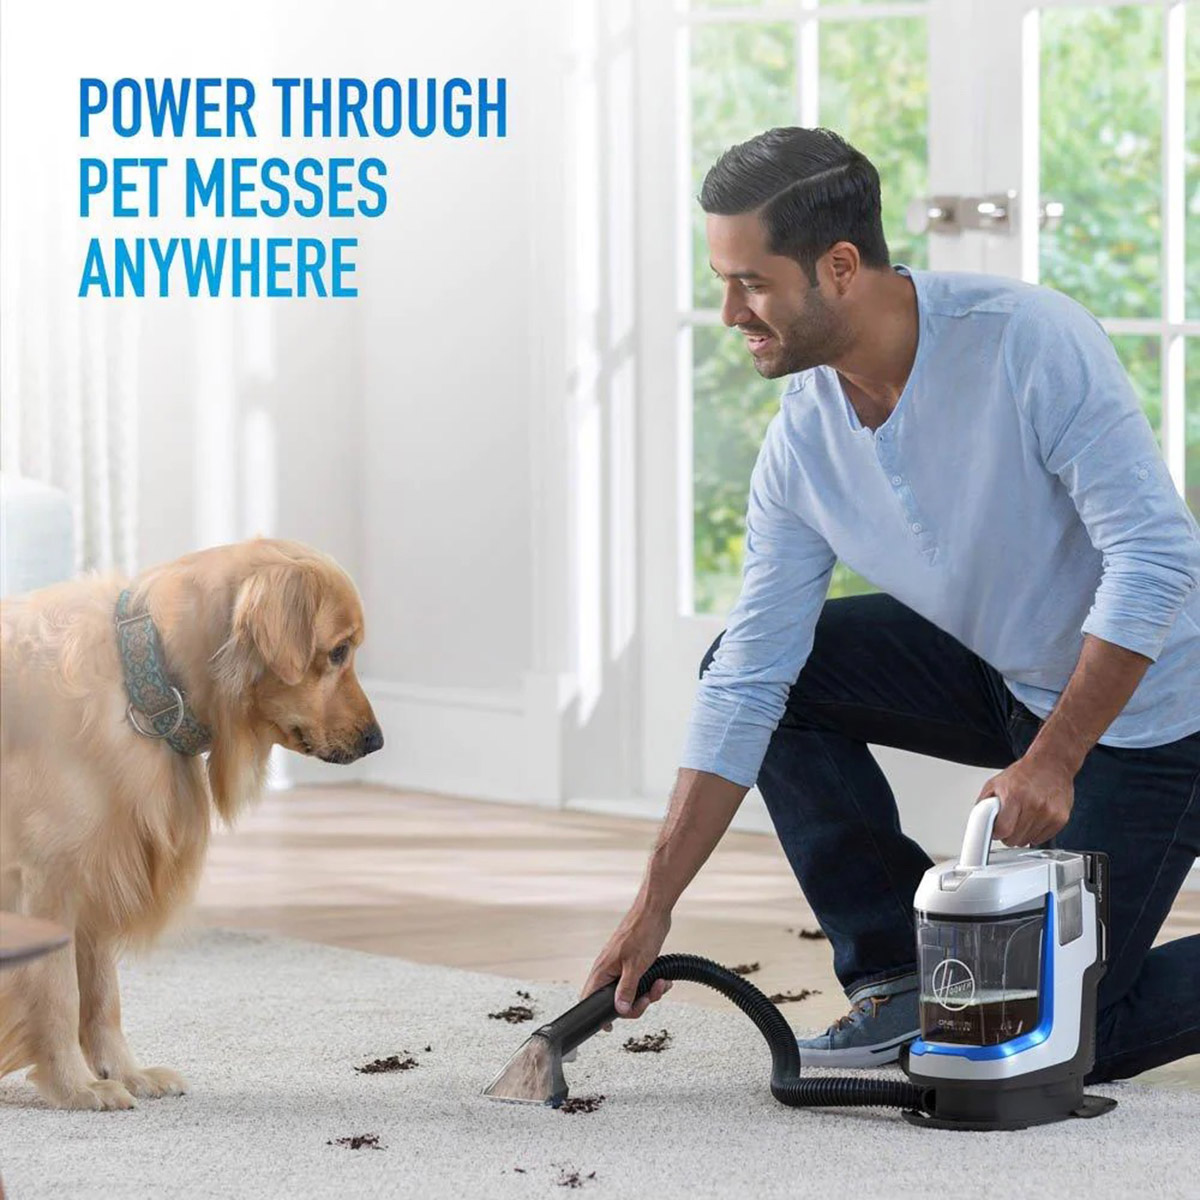 Hoover(R) ONEPWR Spotless GO Cordless Portable Carpet Spot Cleaner